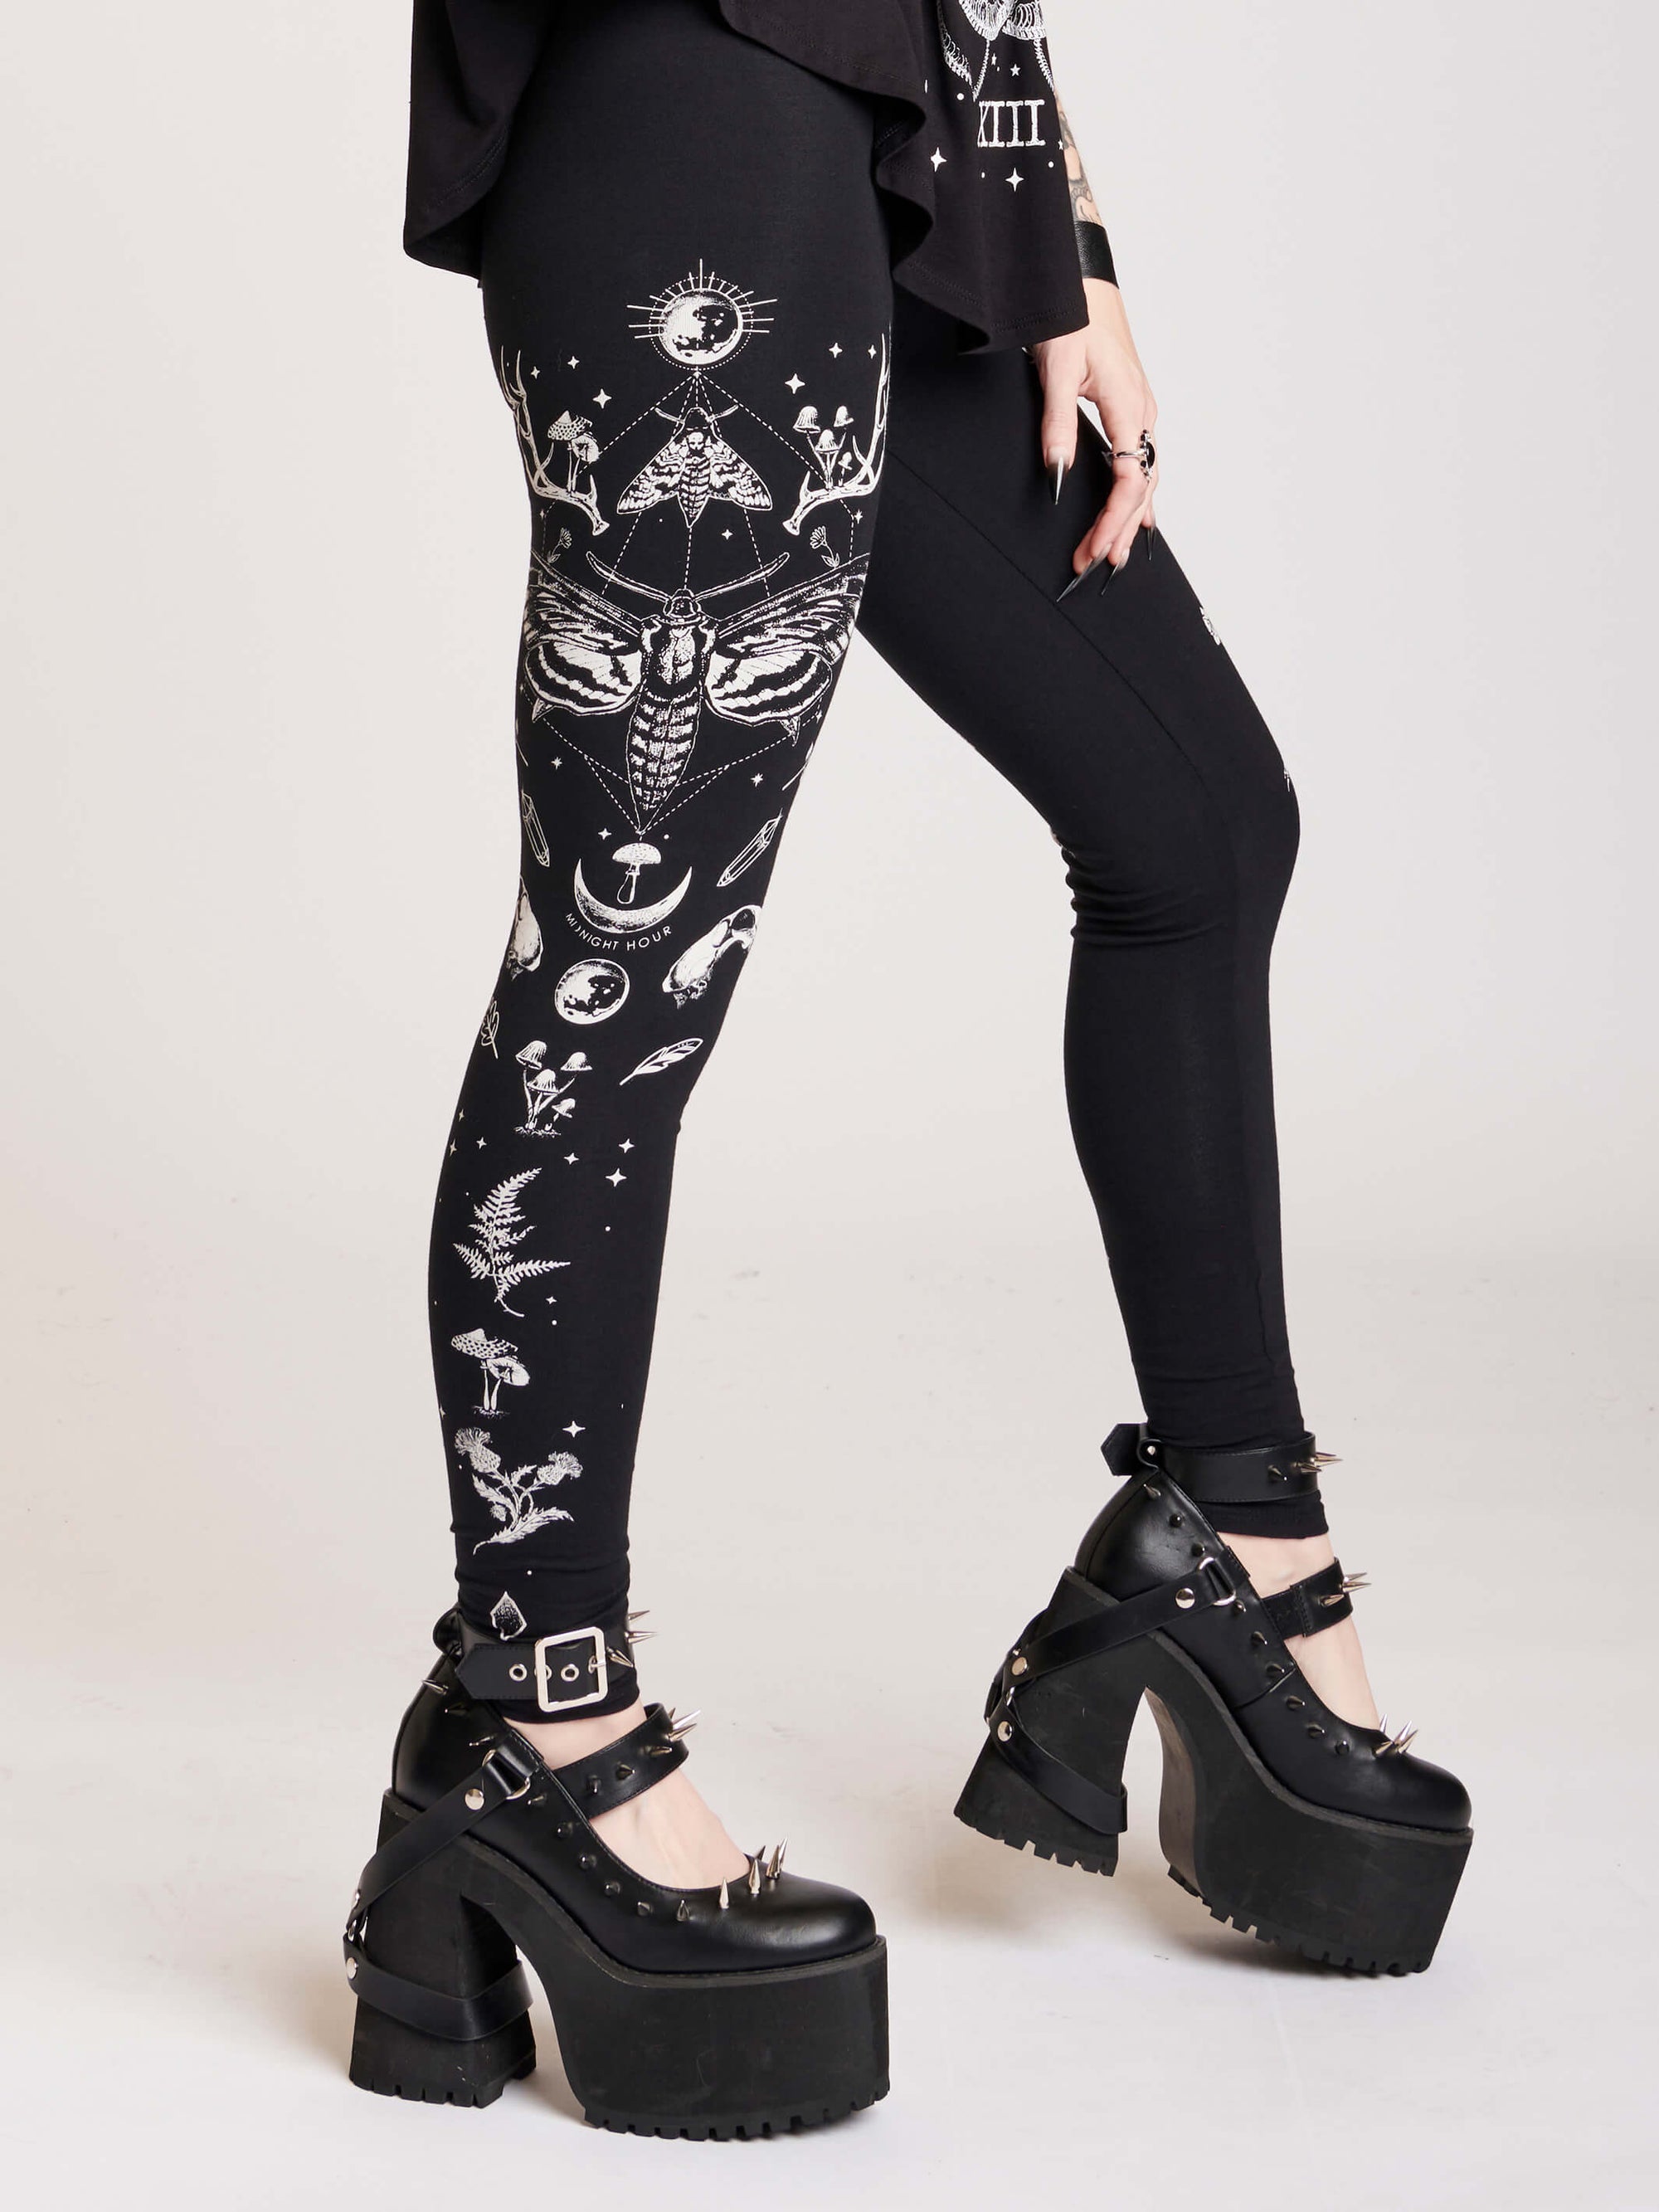 Black legging with death moth and forest findings graphics down sides